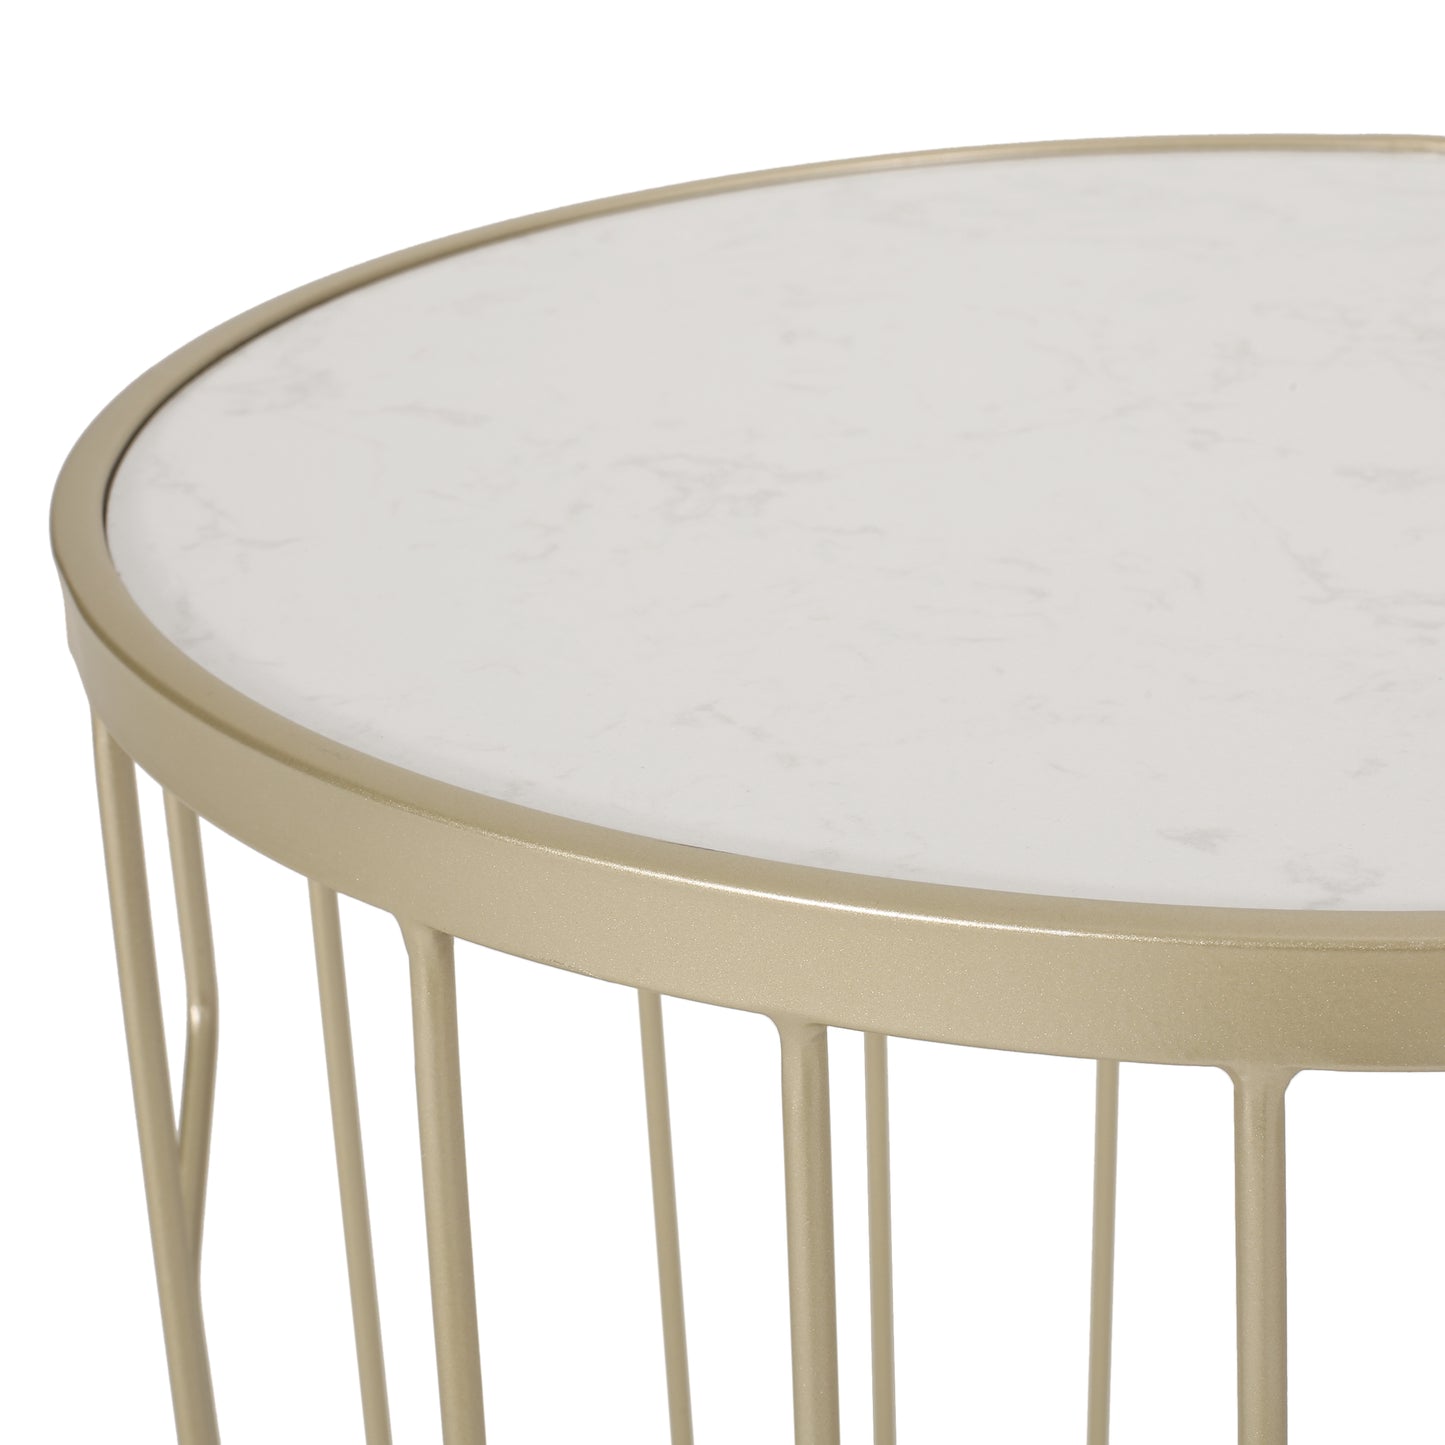 Finethy Modern Glam Faux Marble Side Table, White and Champagne Silver